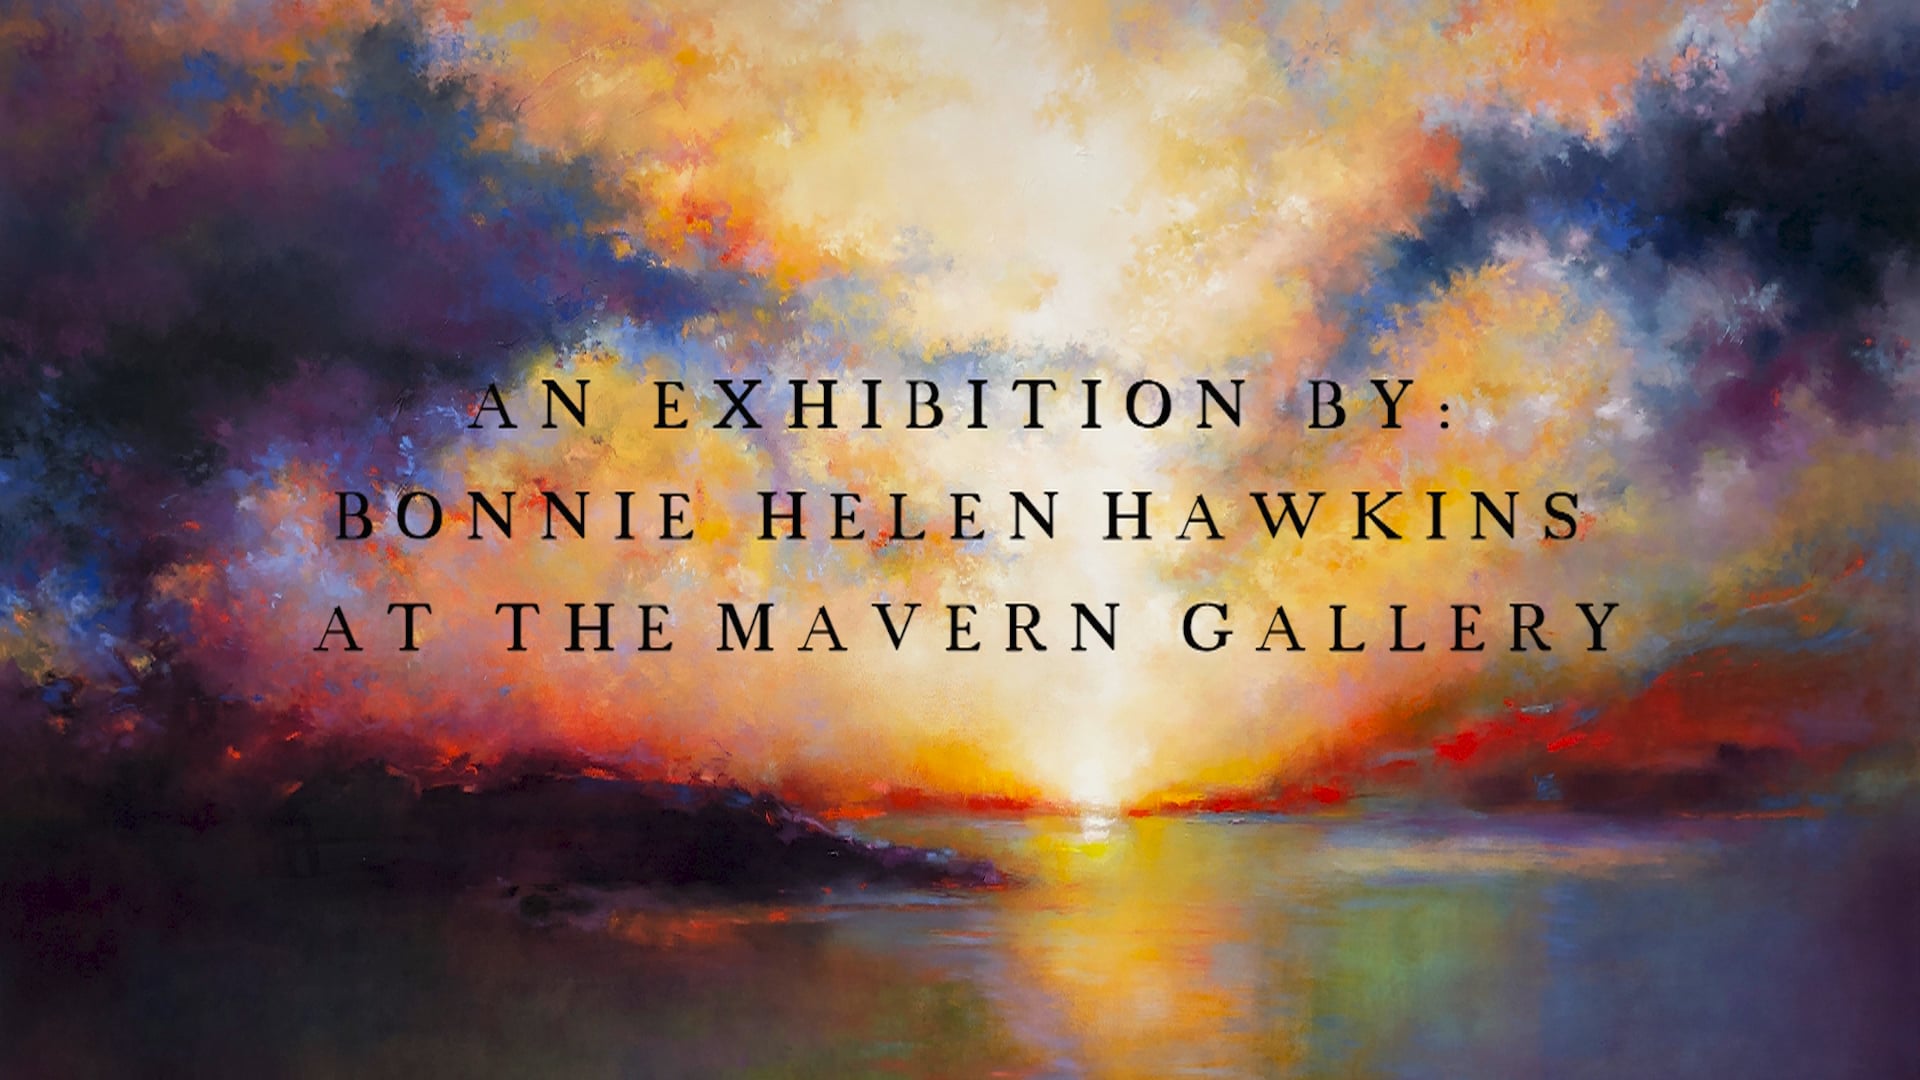 Exhibition film at the mavern gallery